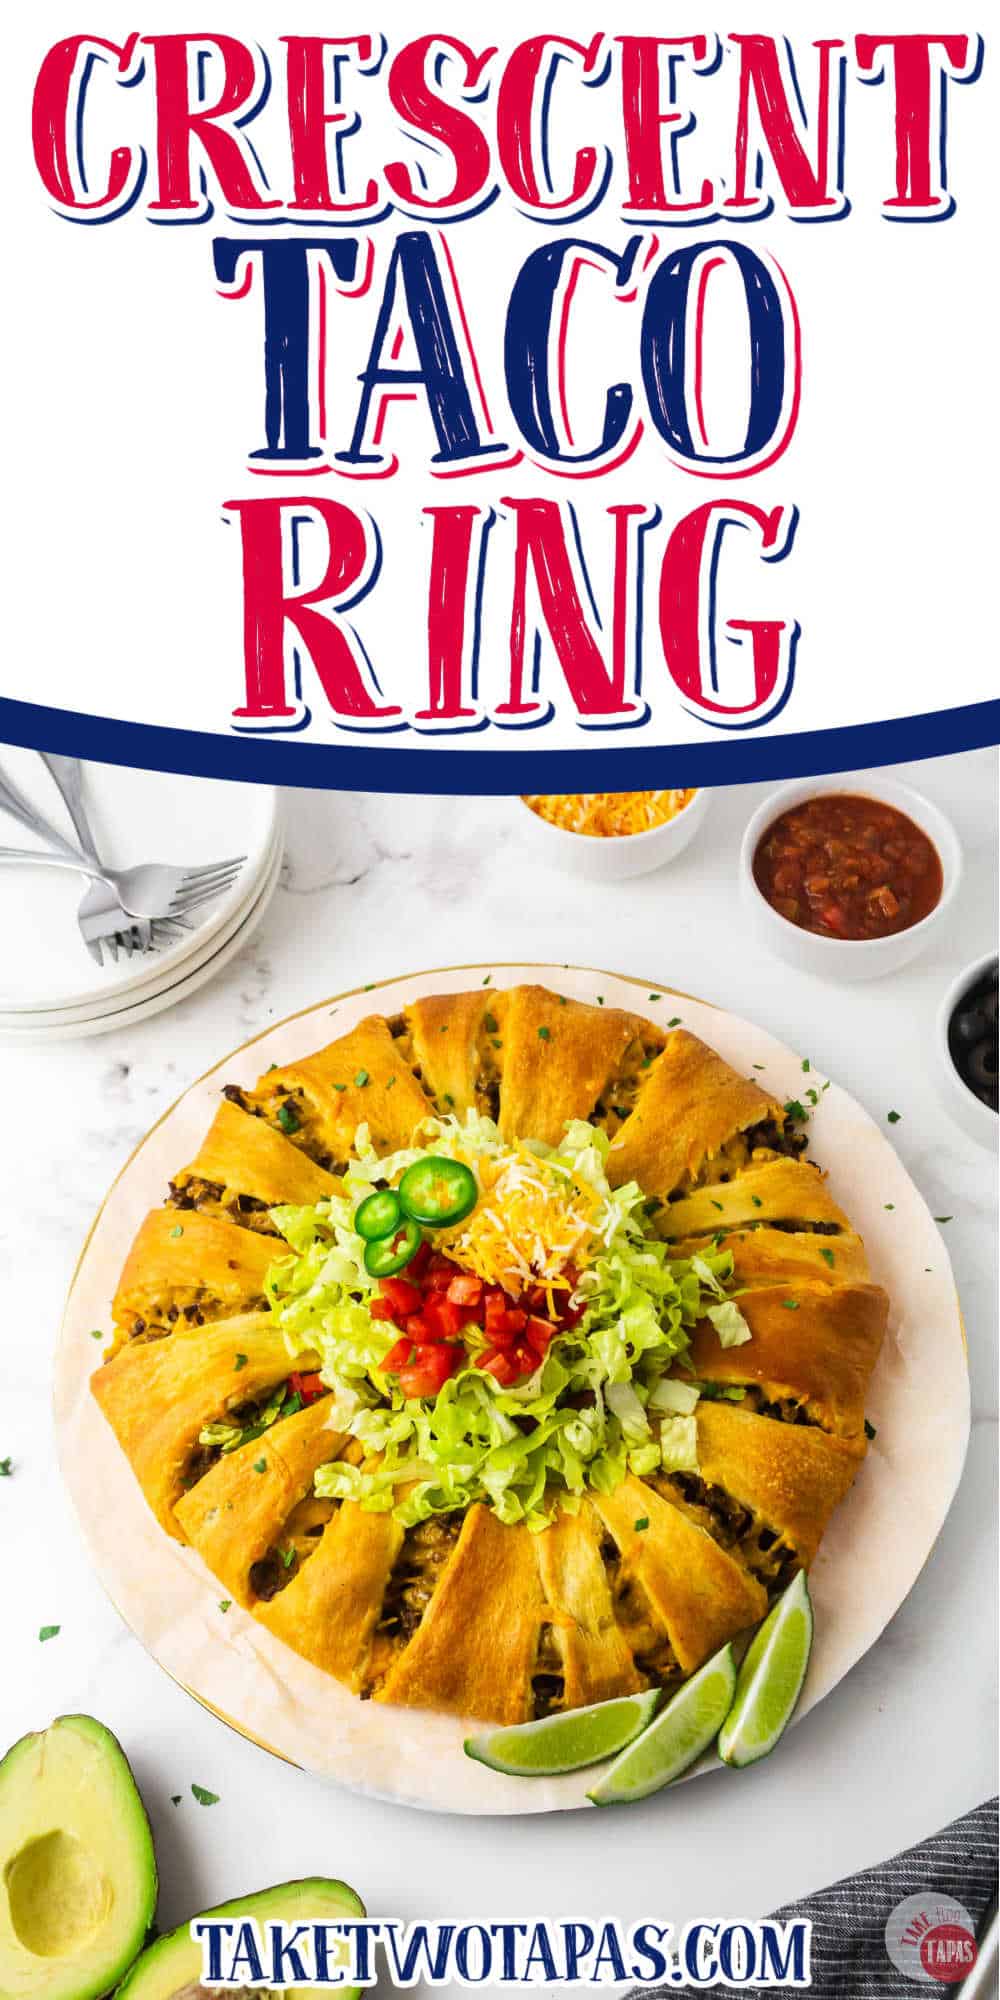 crescent taco bake with text "taco crescent ring appetizer"